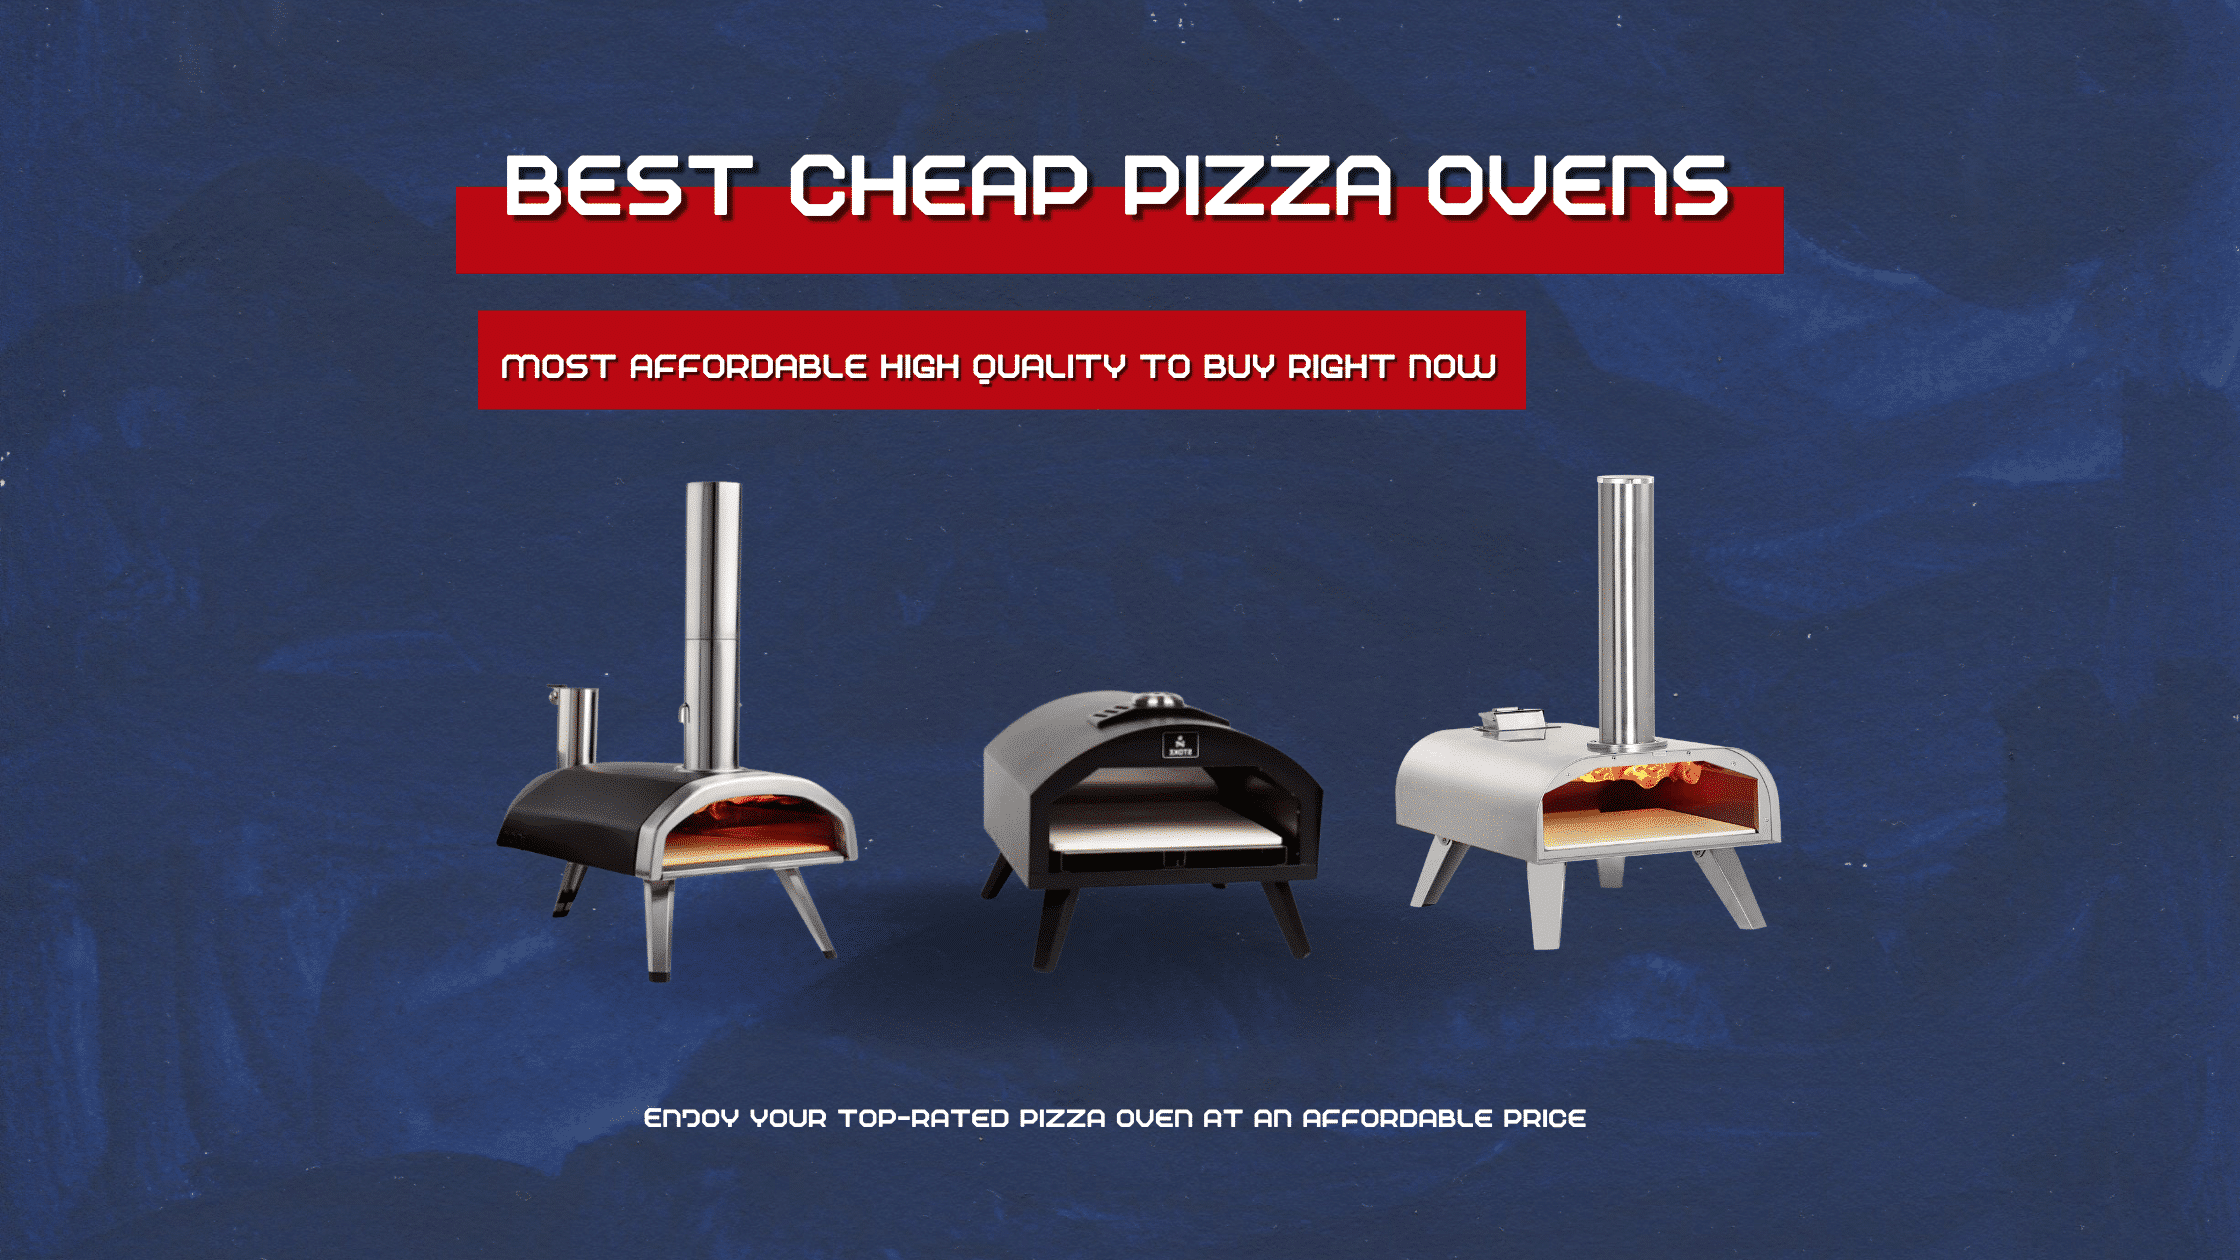 Cheap Pizza Ovens